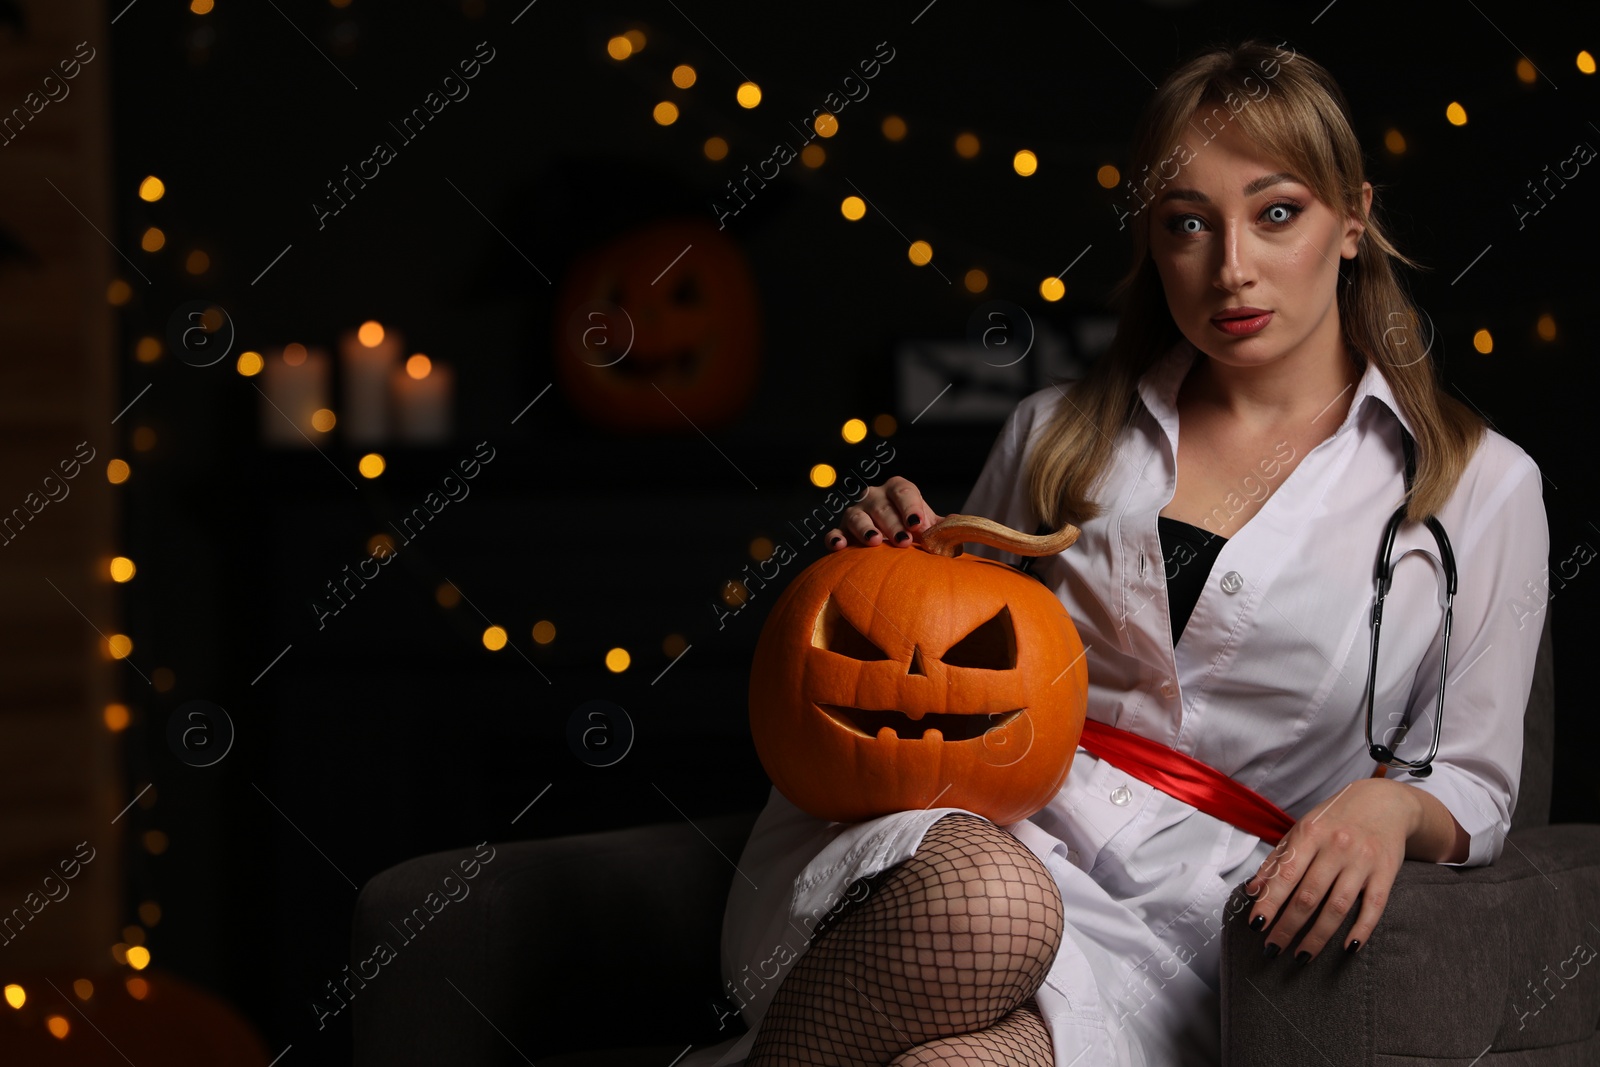 Photo of Woman in scary nurse costume with carved pumpkin against blurred lights indoors, space for text. Halloween celebration